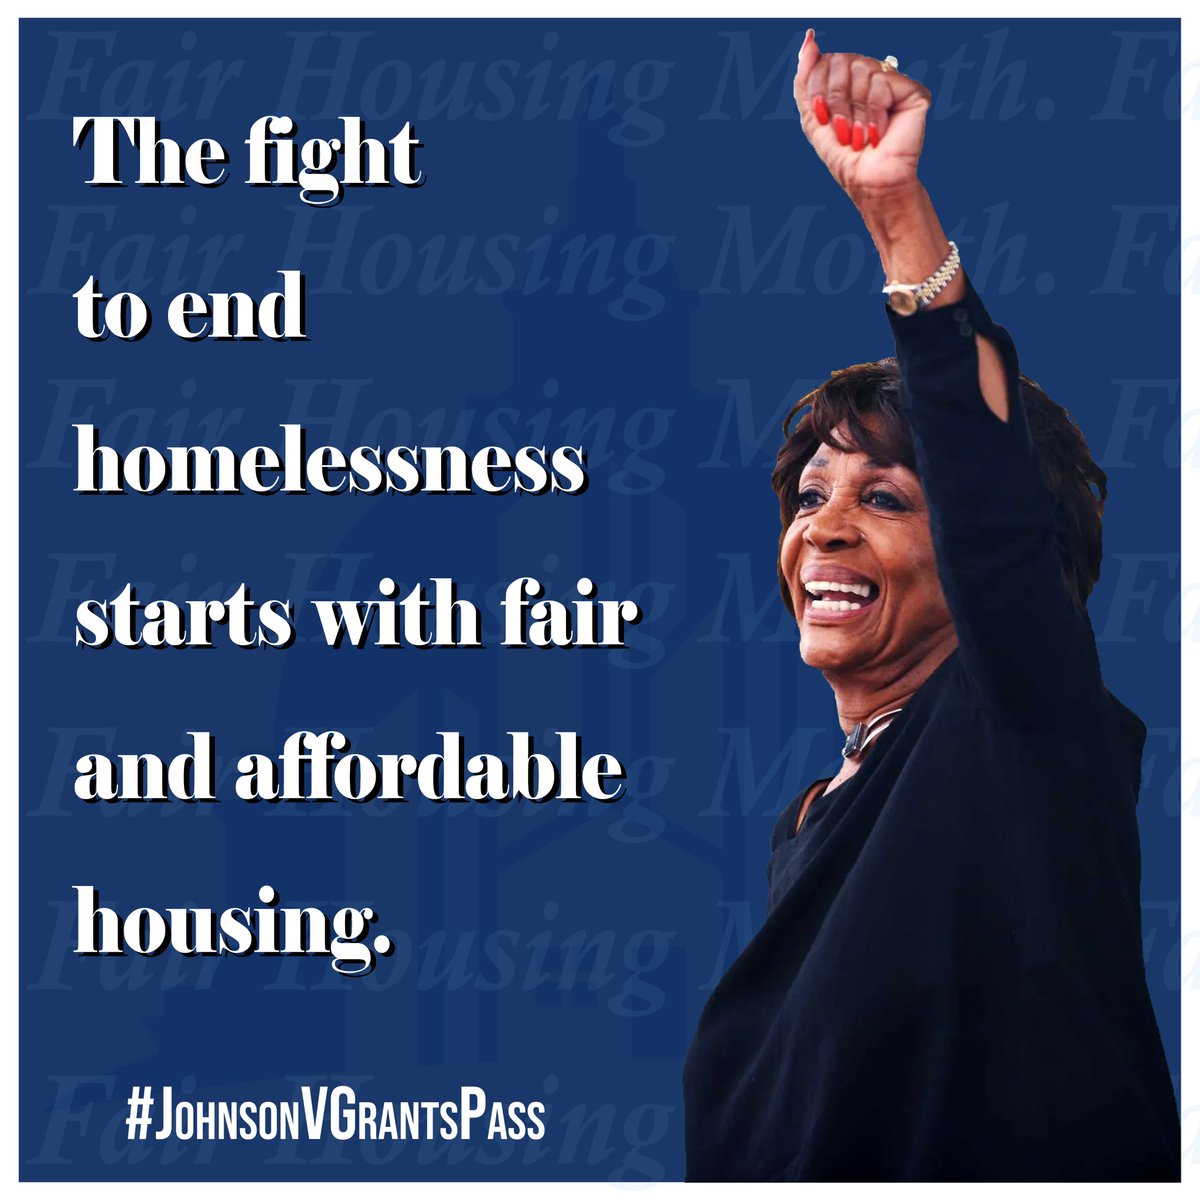 As #SCOTUS⚖️ prepares to hear #JohnsonVGrantsPass, it's critical to emphasize that HOMELESSNESS IS NOT A CRIME. We must focus on long-term solutions like RM @RepMaxineWaters' “Housing Crisis Response Act,” “Ending Homelessness Act,” & “Downpayment Toward Equity Act” to increase…